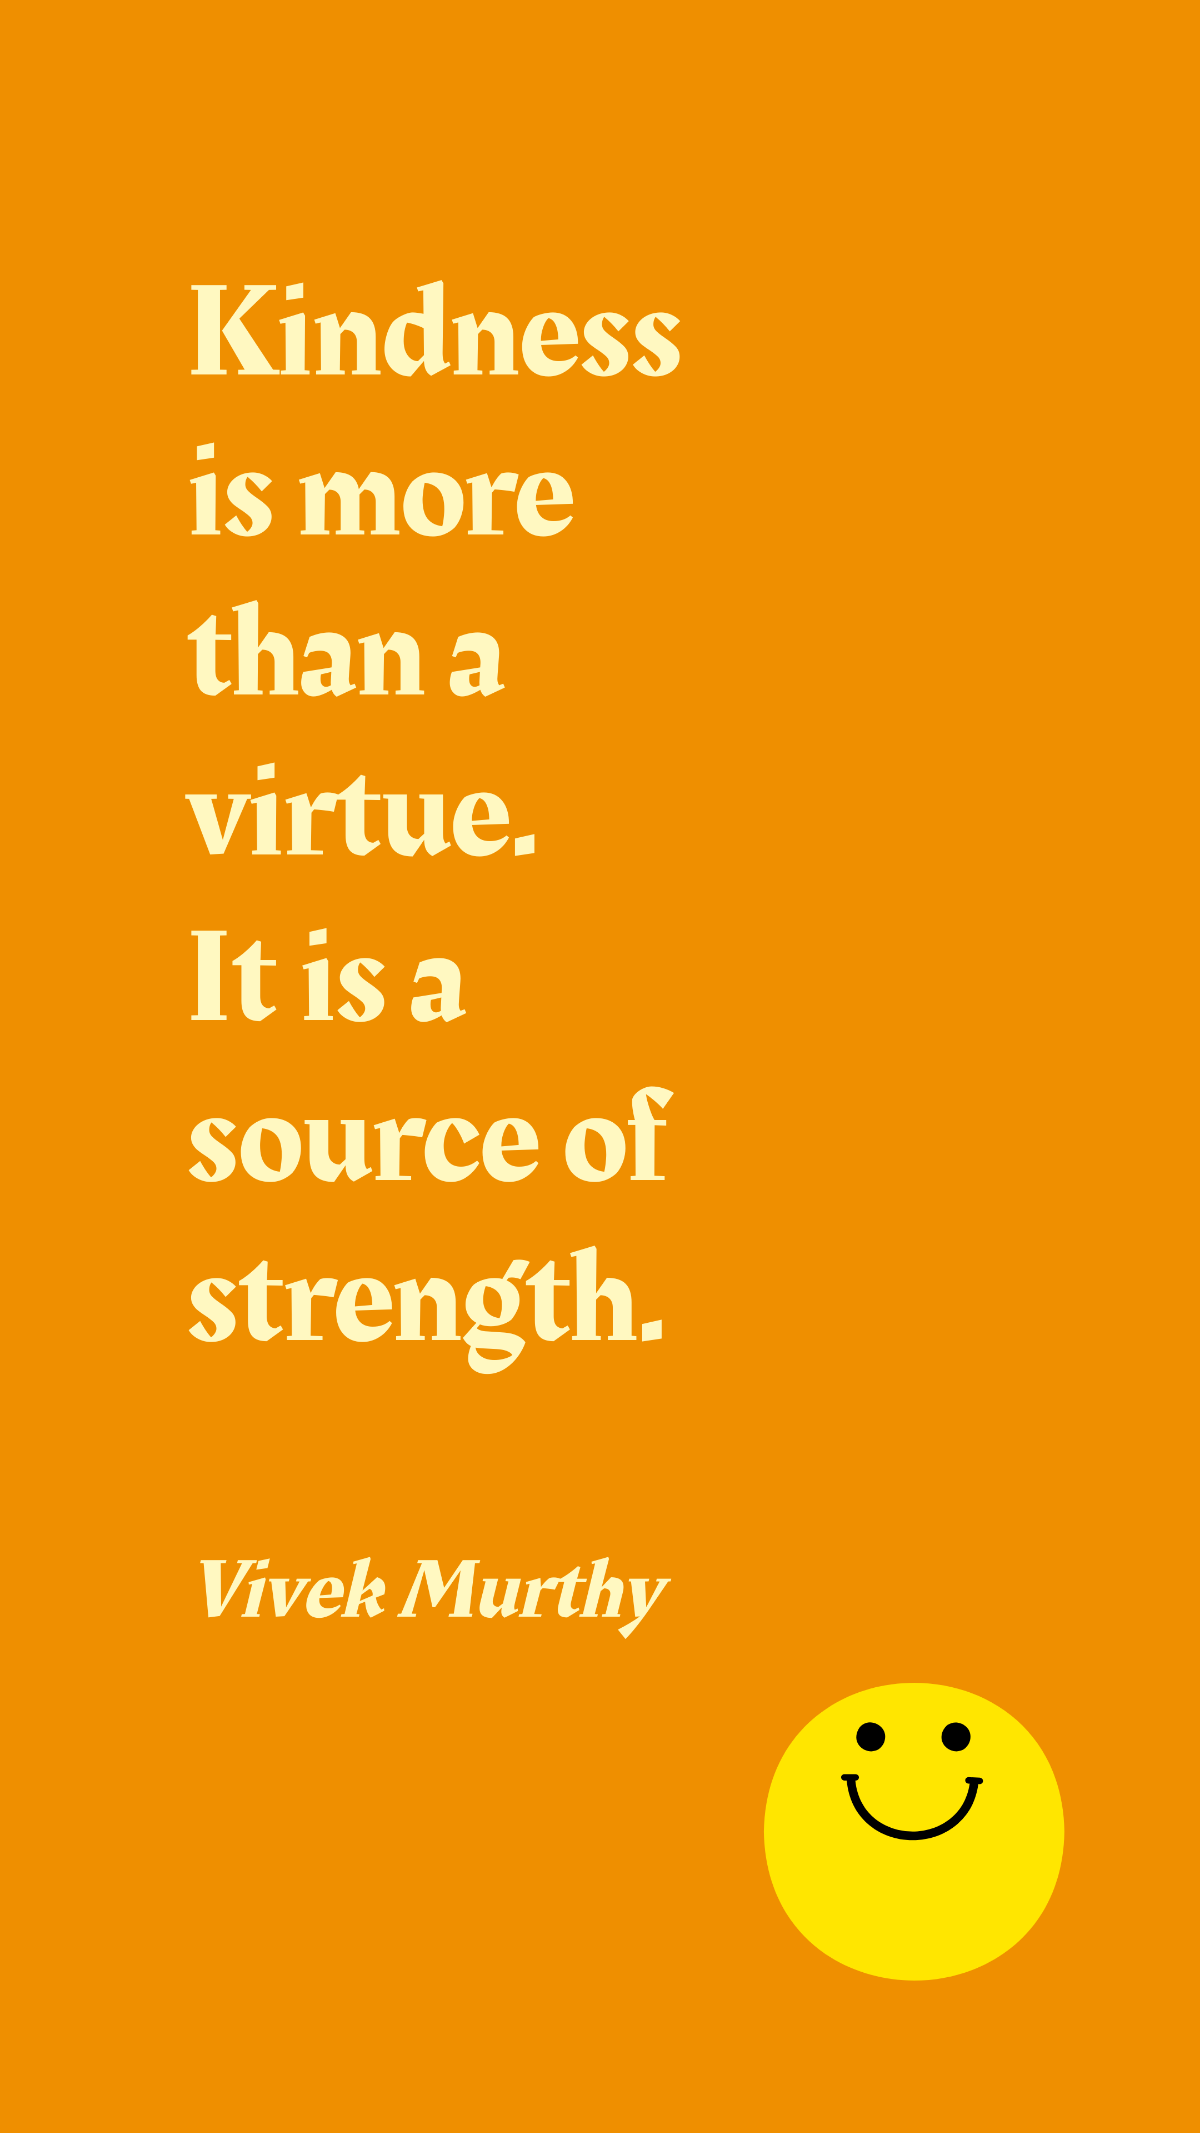 Free Vivek Murthy - Kindness is more than a virtue. It is a source of strength. Template